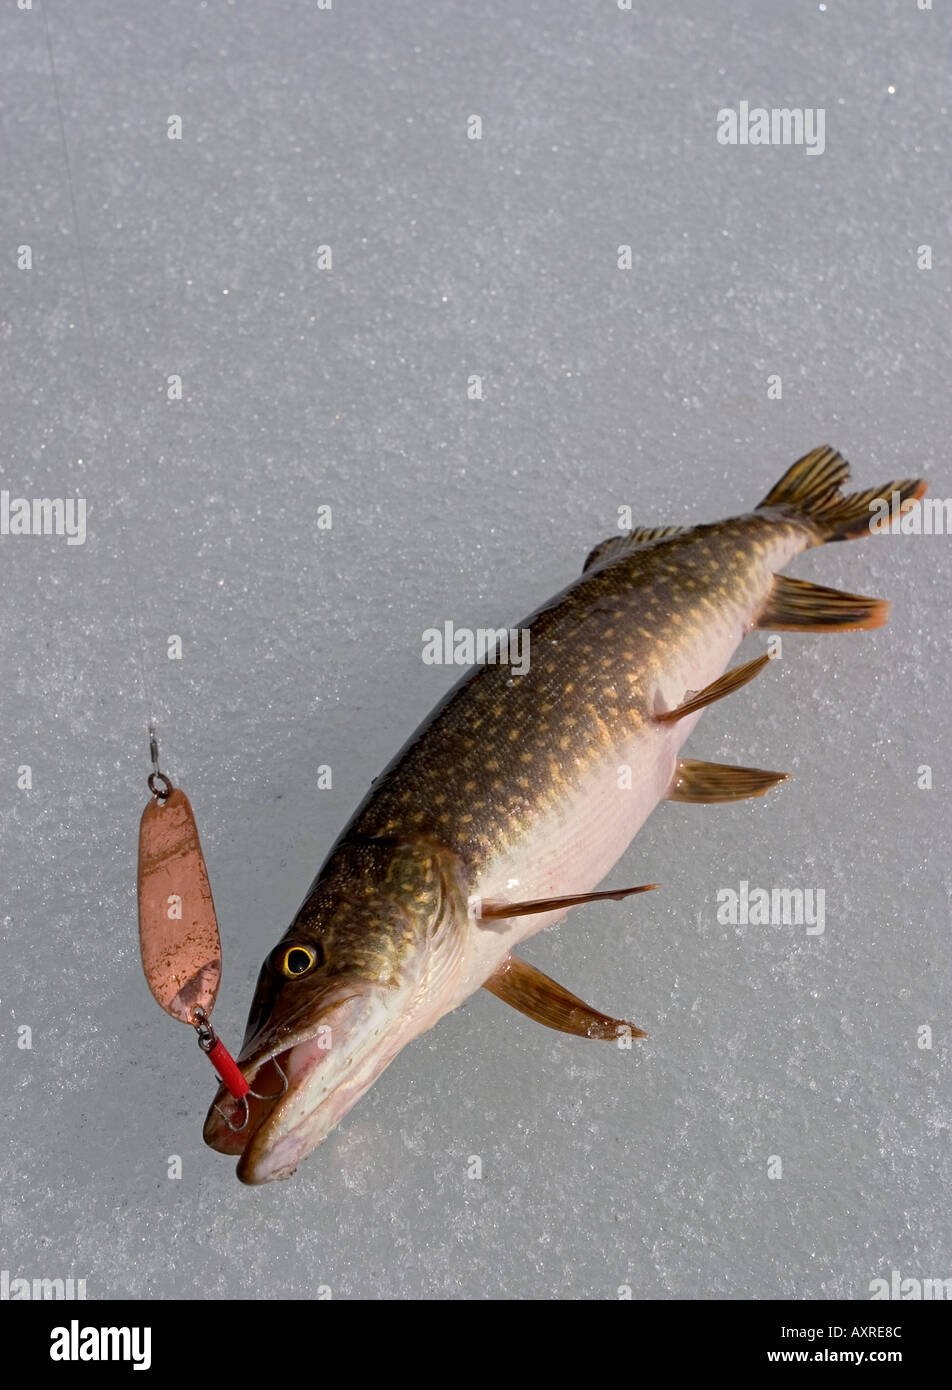 https://c8.alamy.com/comp/AXRE8C/freshly-caught-northern-pike-esox-lucius-on-ice-with-the-lure-in-its-AXRE8C.jpg